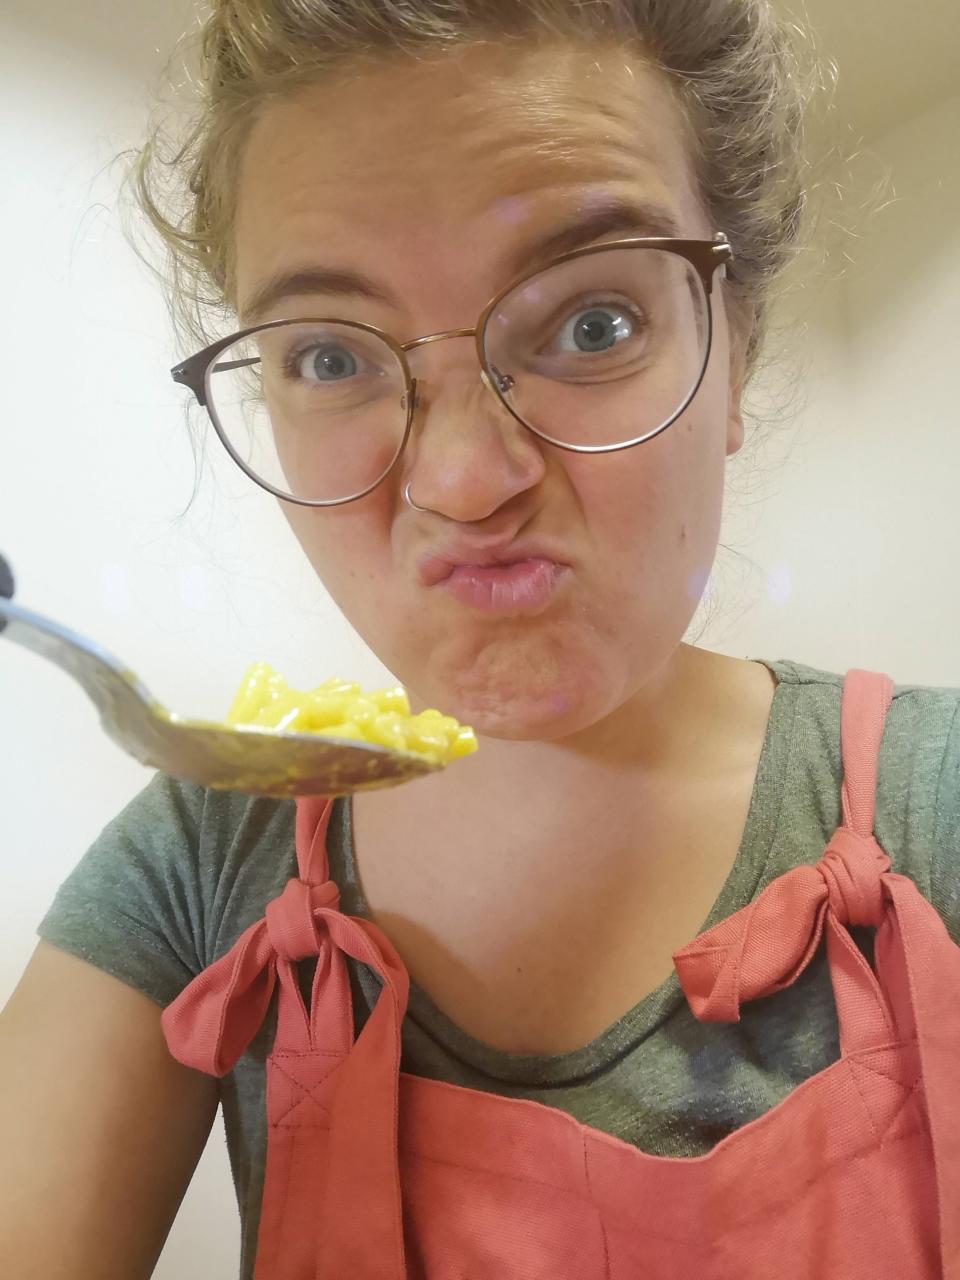 The author making a confused face with a spoonful of mac and cheese